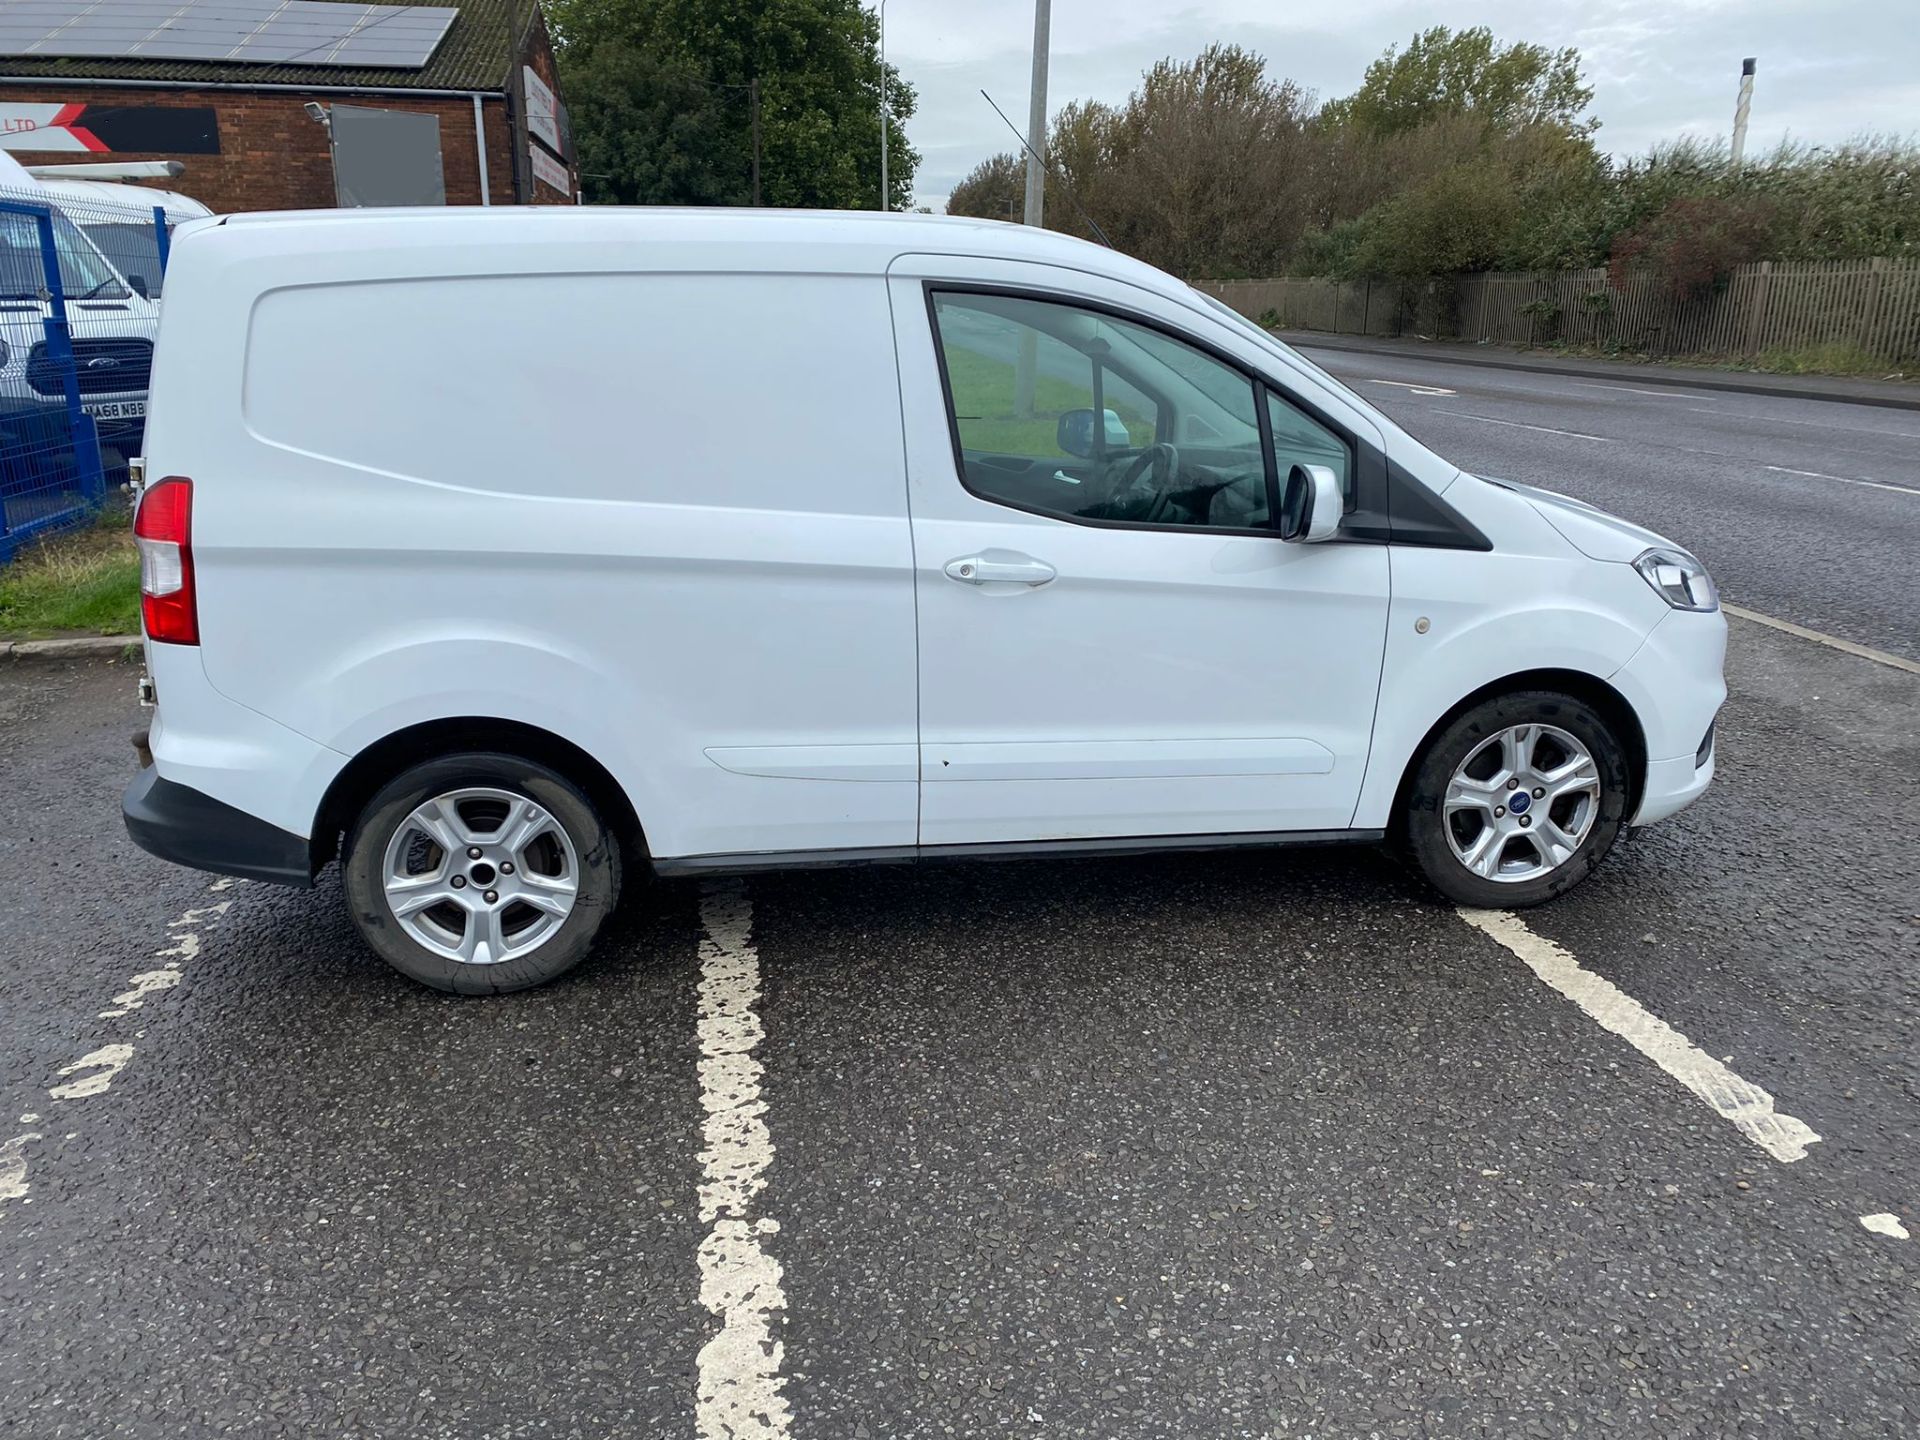 2019 19 FORD TRANSIT COURIER LIMITED PANEL VAN - ALLOY WHEELS - AIR CON - EURO 6. - Image 8 of 10